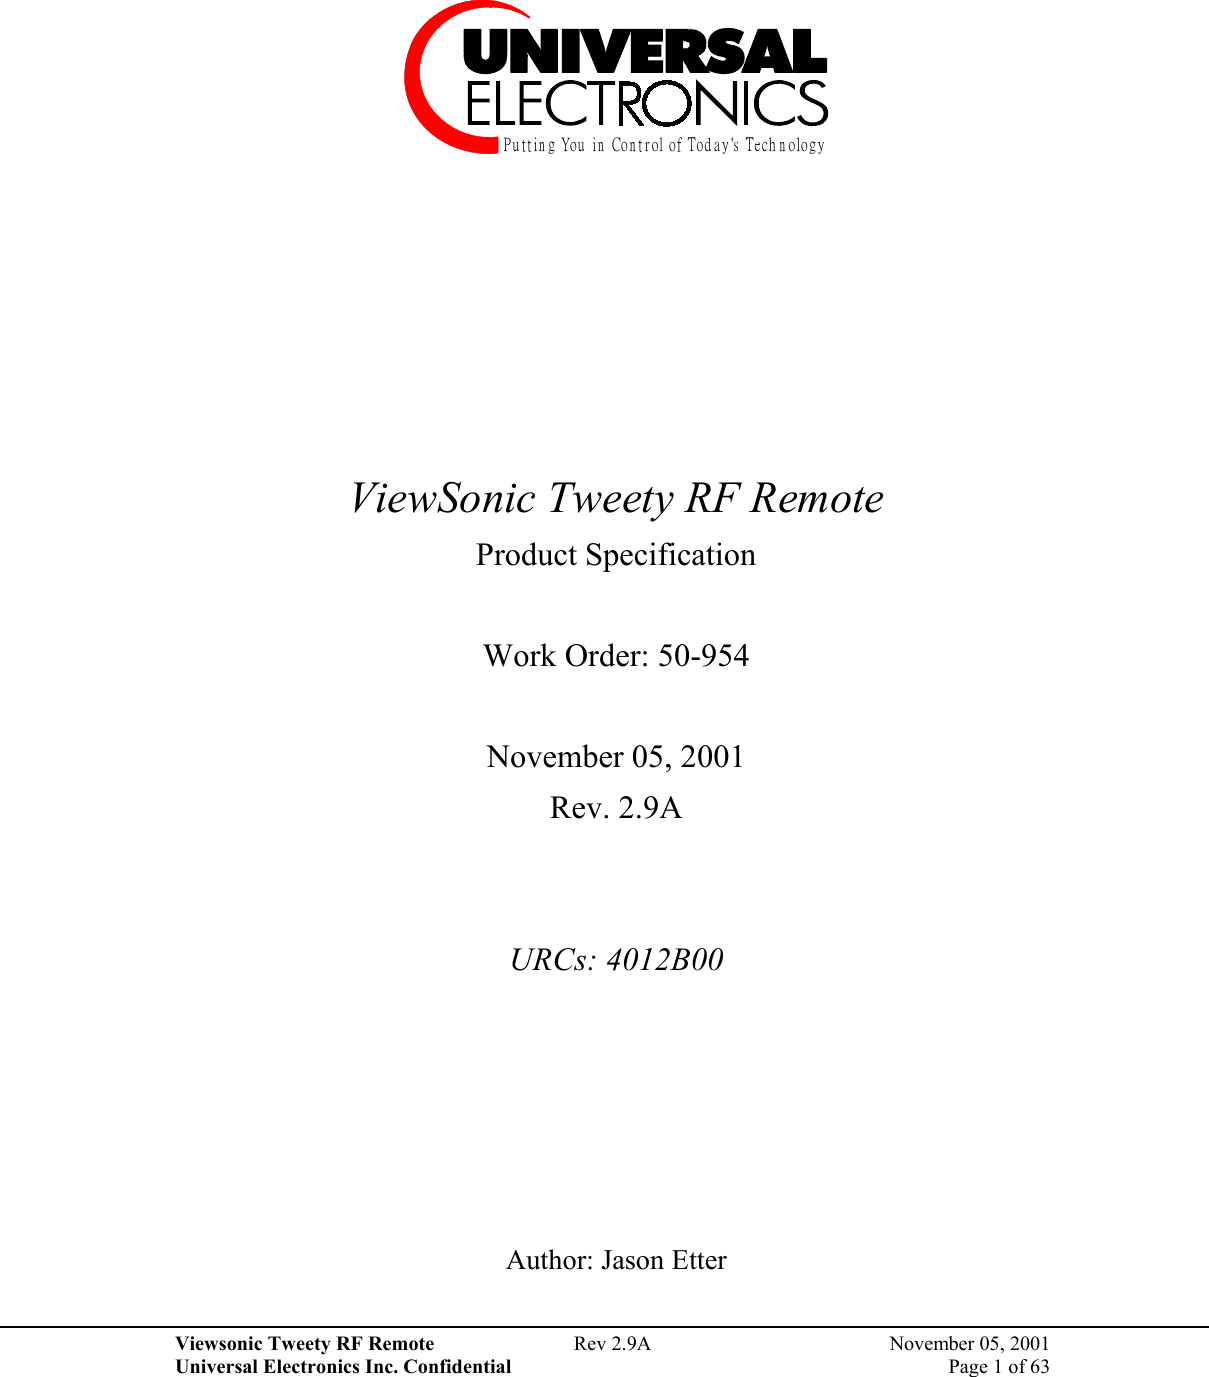 Viewsonic Tweety RF Remote  Rev 2.9A  November 05, 2001 Universal Electronics Inc. Confidential    Page 1 of 63 Pu ttin g You  in  Con trol of Tod ay &apos;s Tech n ology       ViewSonic Tweety RF Remote  Product Specification  Work Order: 50-954  November 05, 2001 Rev. 2.9A   URCs: 4012B00       Author: Jason Etter  